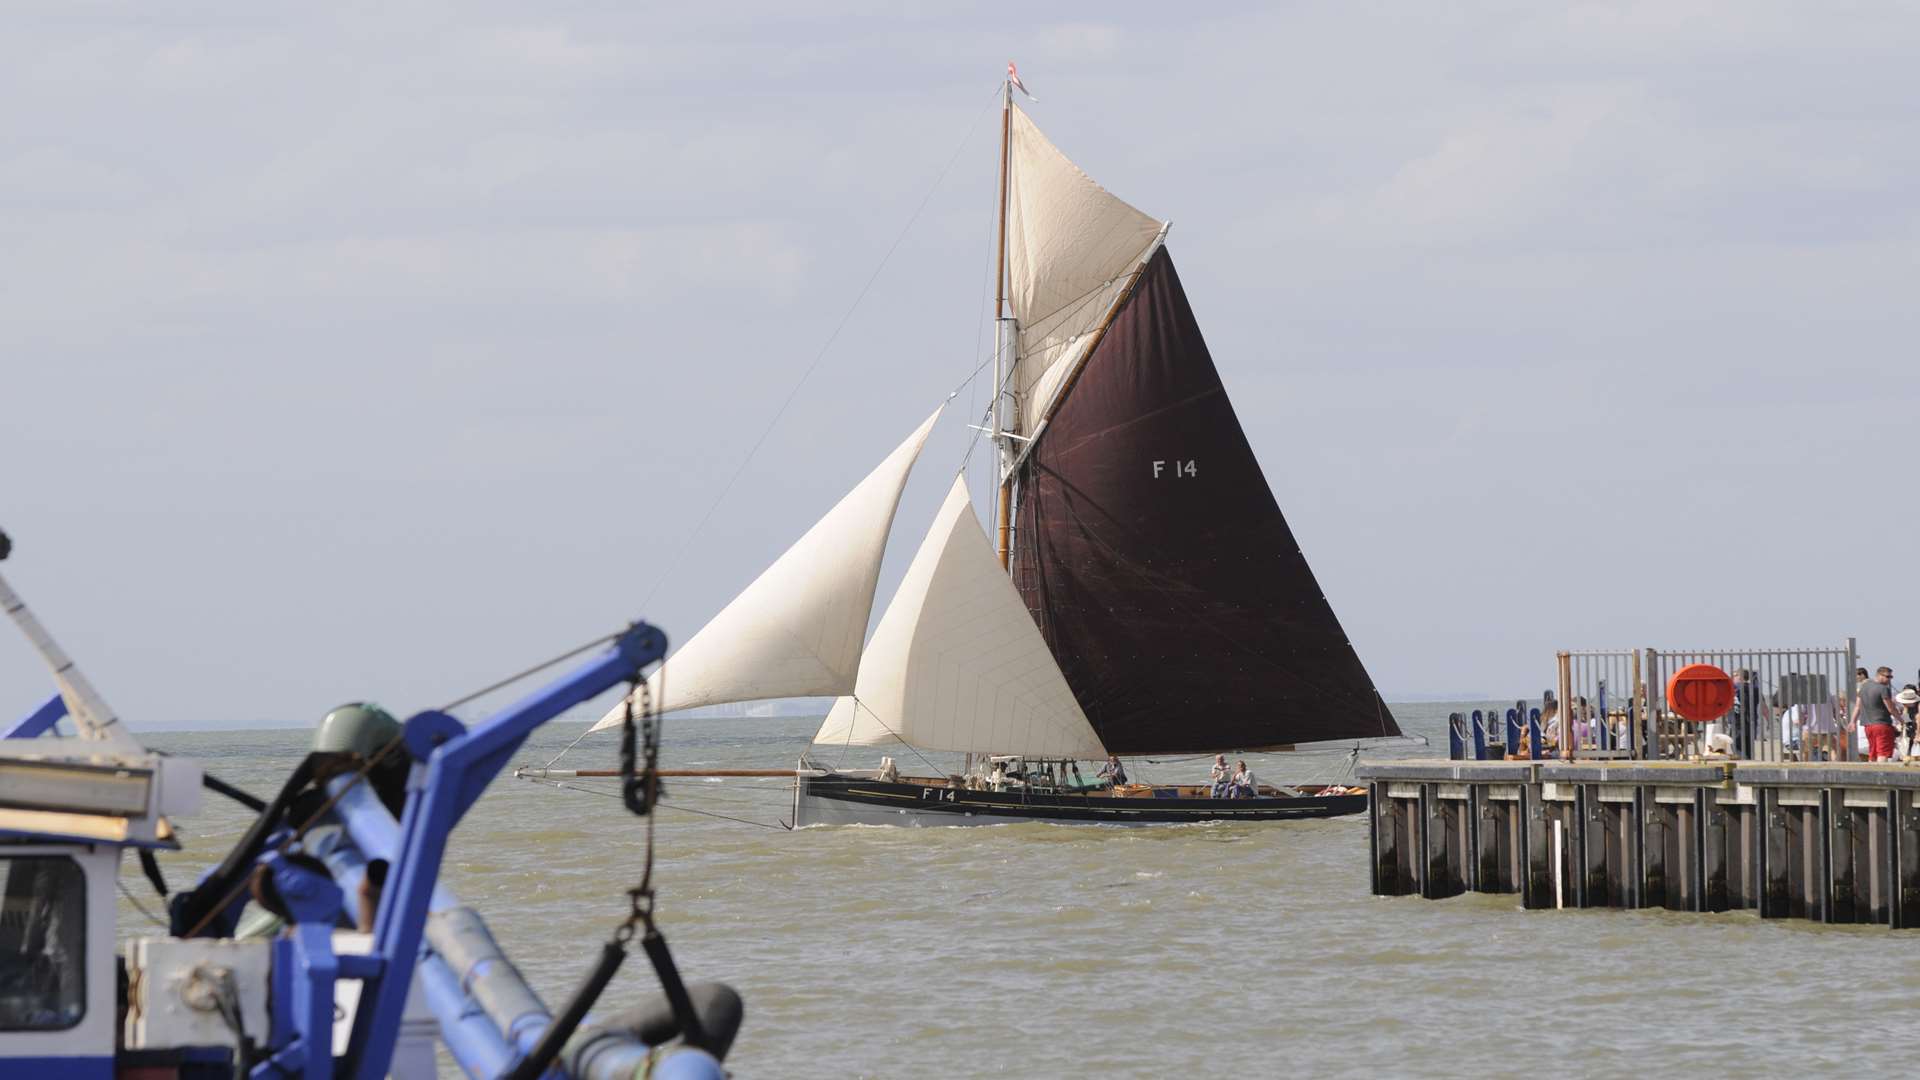 Harbour Day clashed with the Regatta and Herne Bay air show in 2015